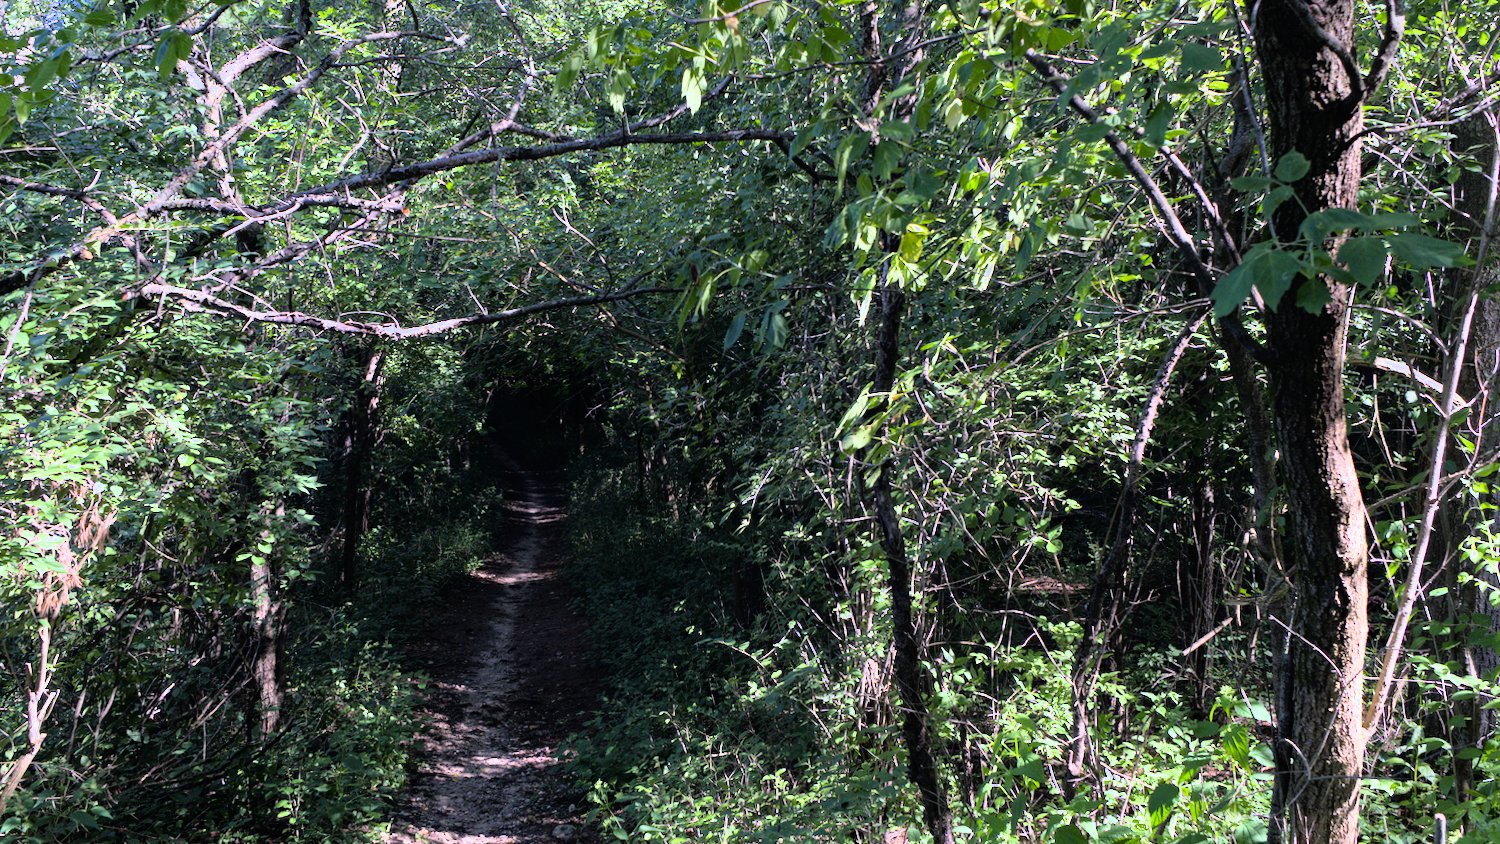 View through the tree canopy of Oak View Trail.